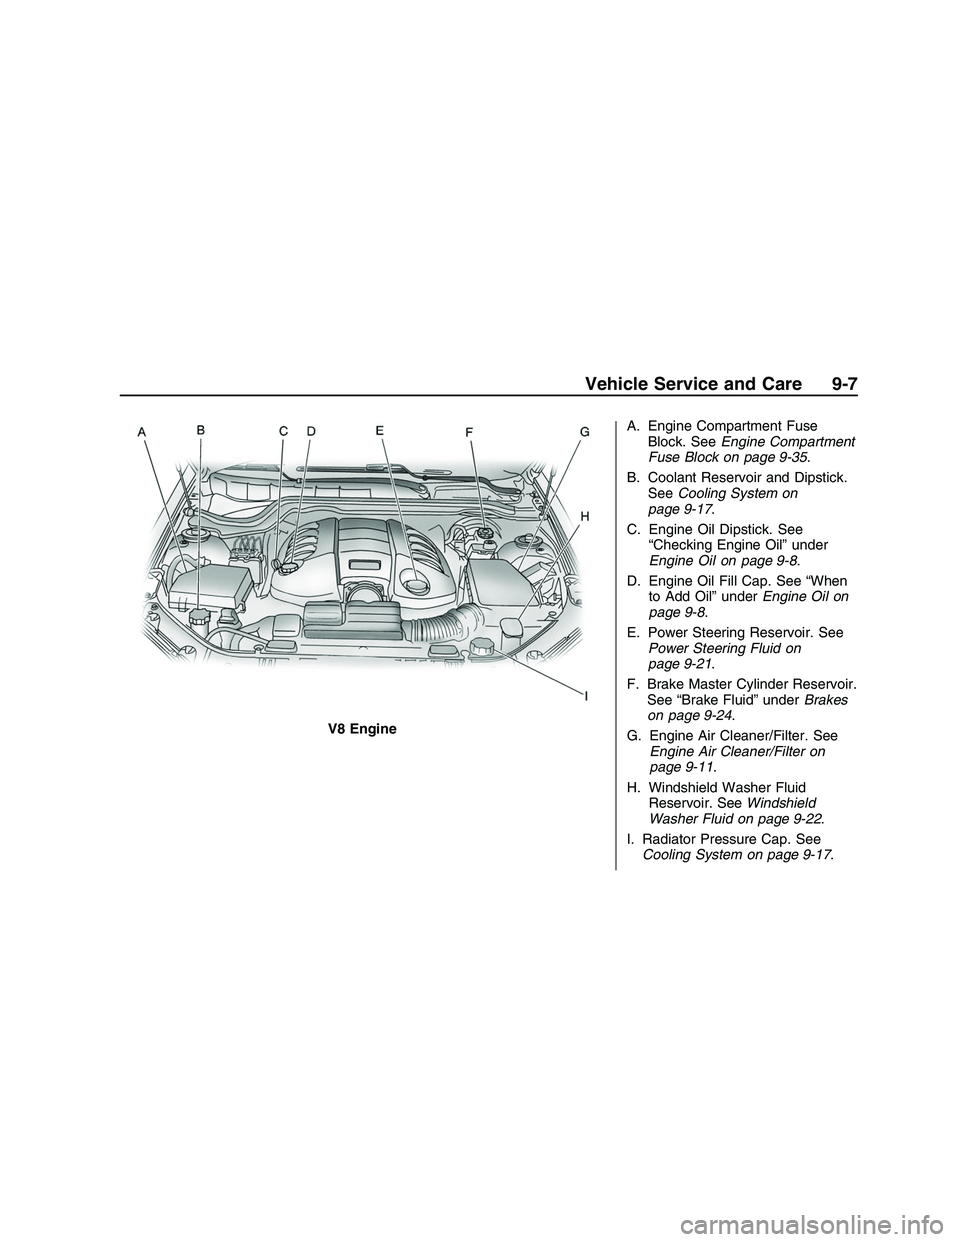 PONTIAC G8 2008  Owners Manual A. Engine Compartment FuseBlock. See Engine Compartment
Fuse Block on page 9-35 .
B. Coolant Reservoir and Dipstick. See Cooling System on
page 9-17 .
C. Engine Oil Dipstick. See “Checking Engine Oi